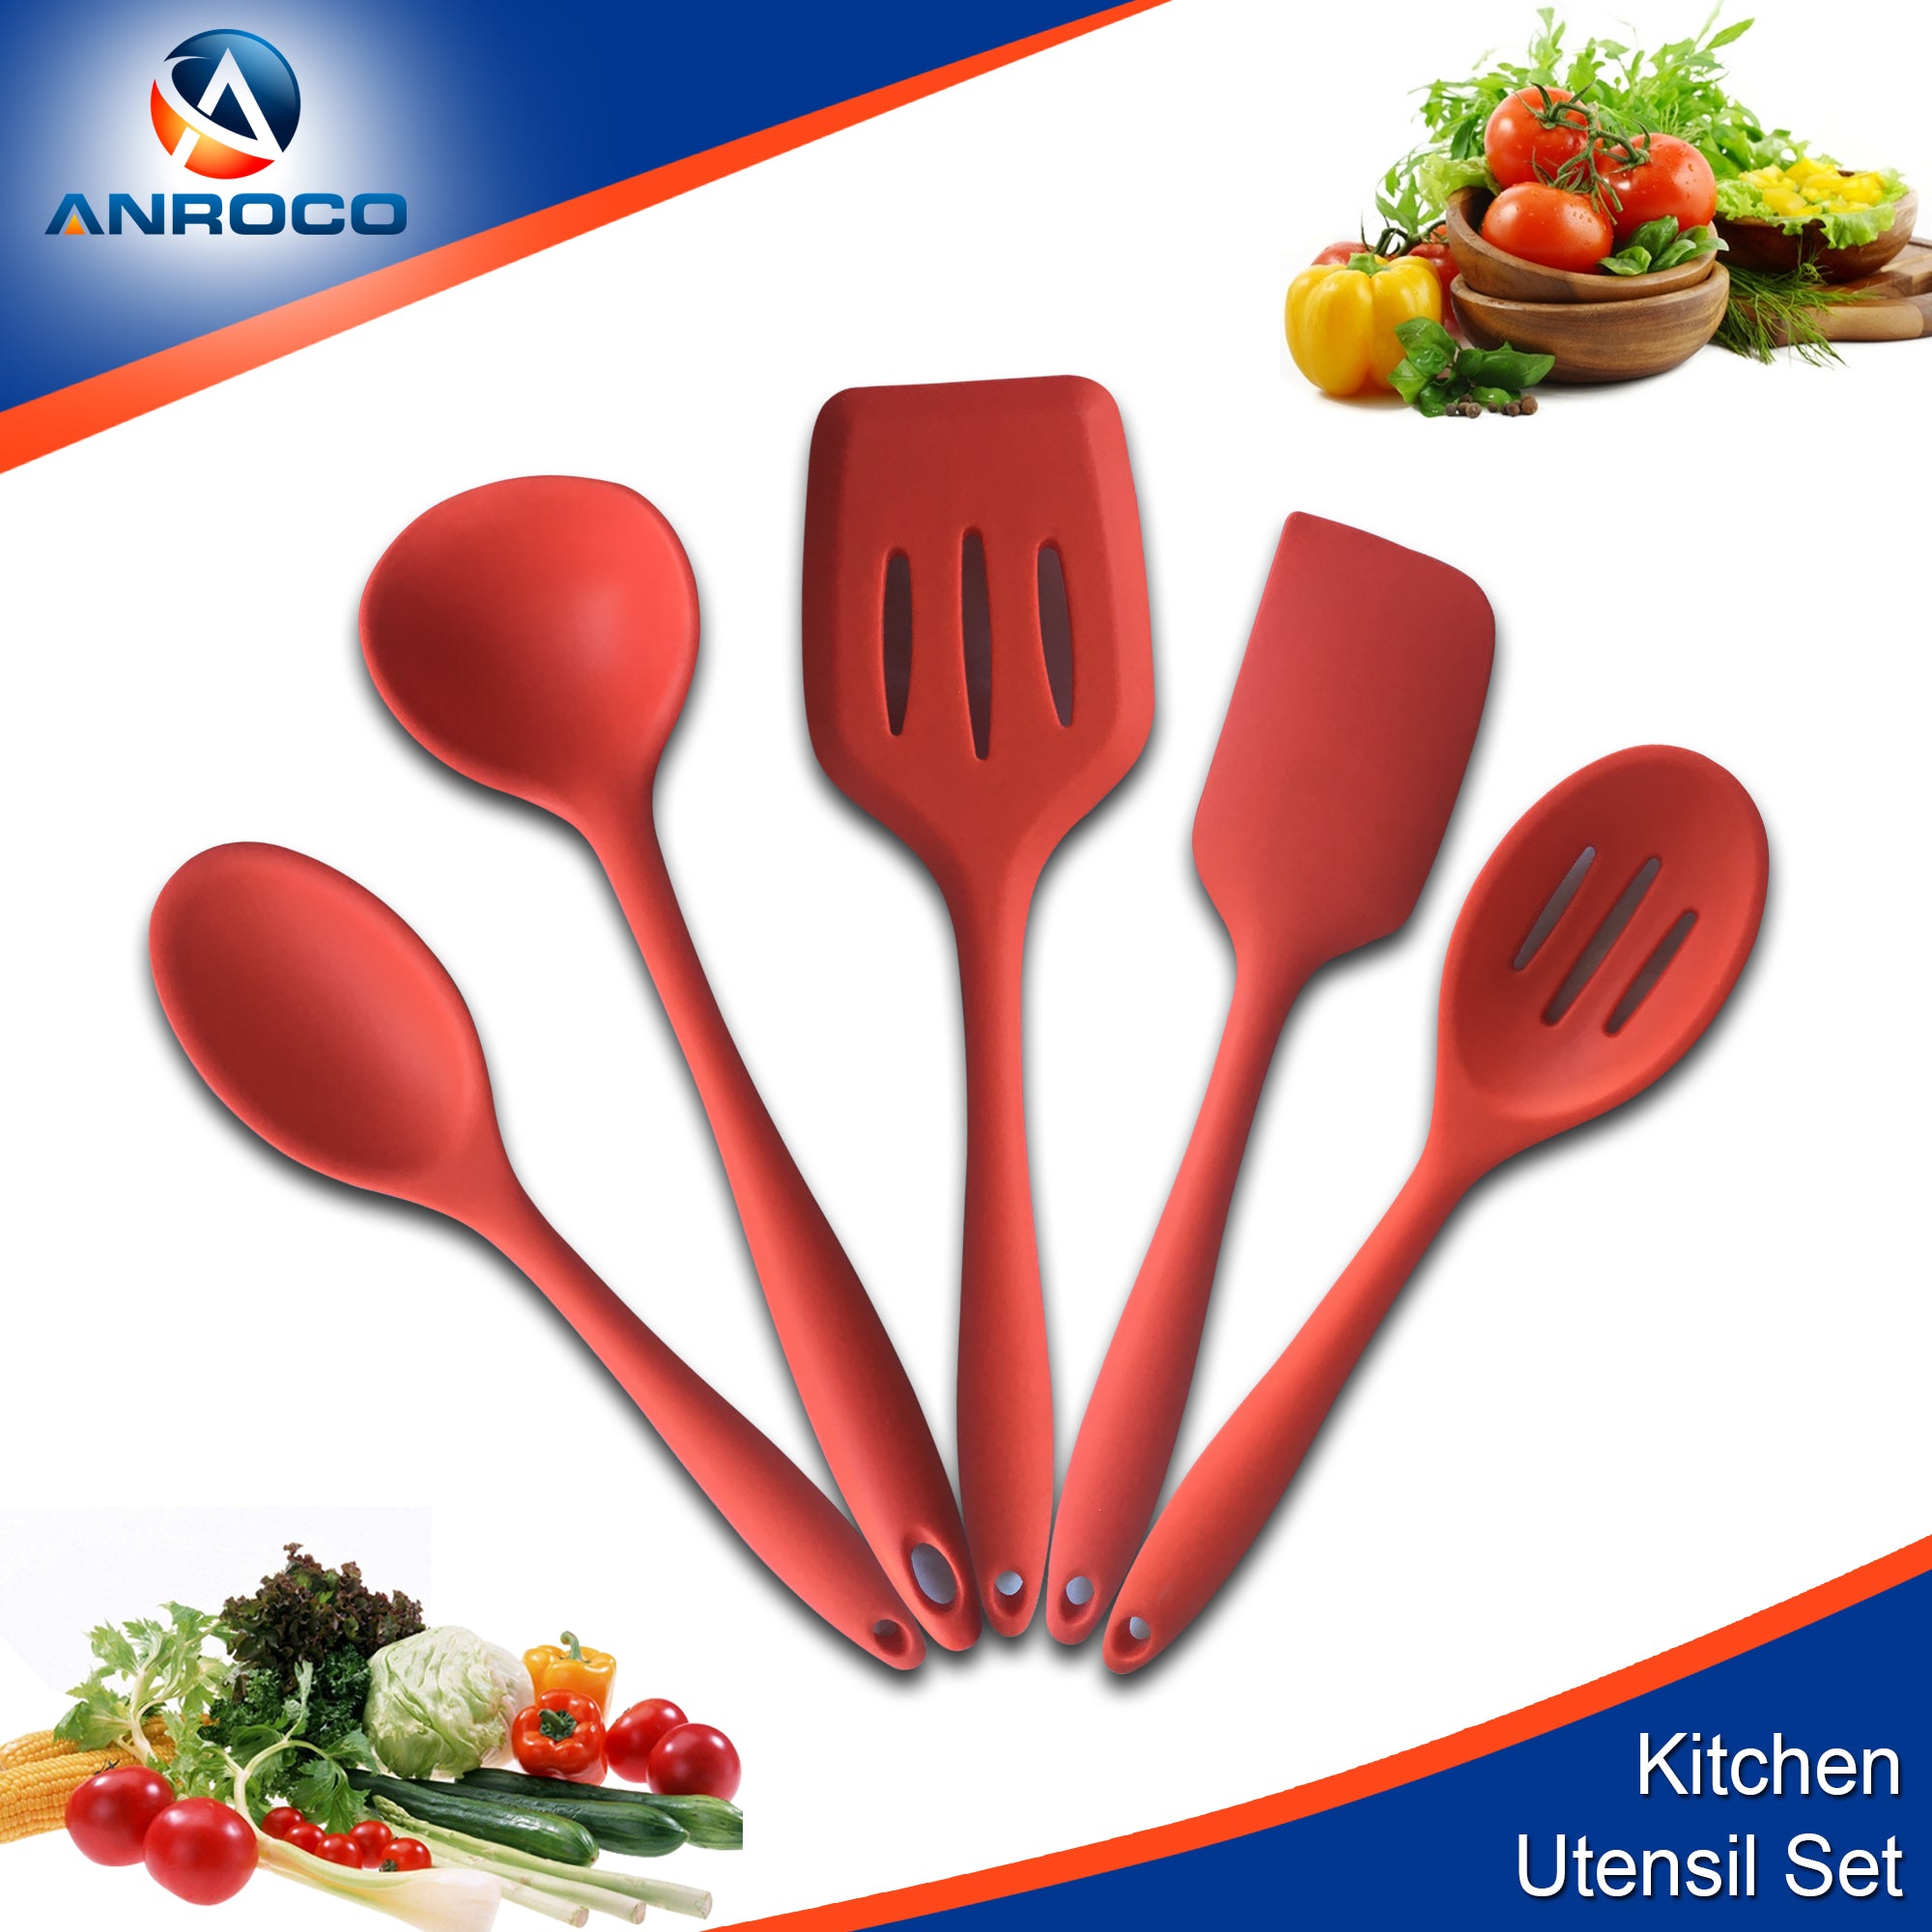 Cook with Color Silicone Cooking Utensils, 5 PC Kitchen Utensil Set, Easy to Clean Silicone Kitchen Utensils, Cooking Utensils for Nonstick Cookware